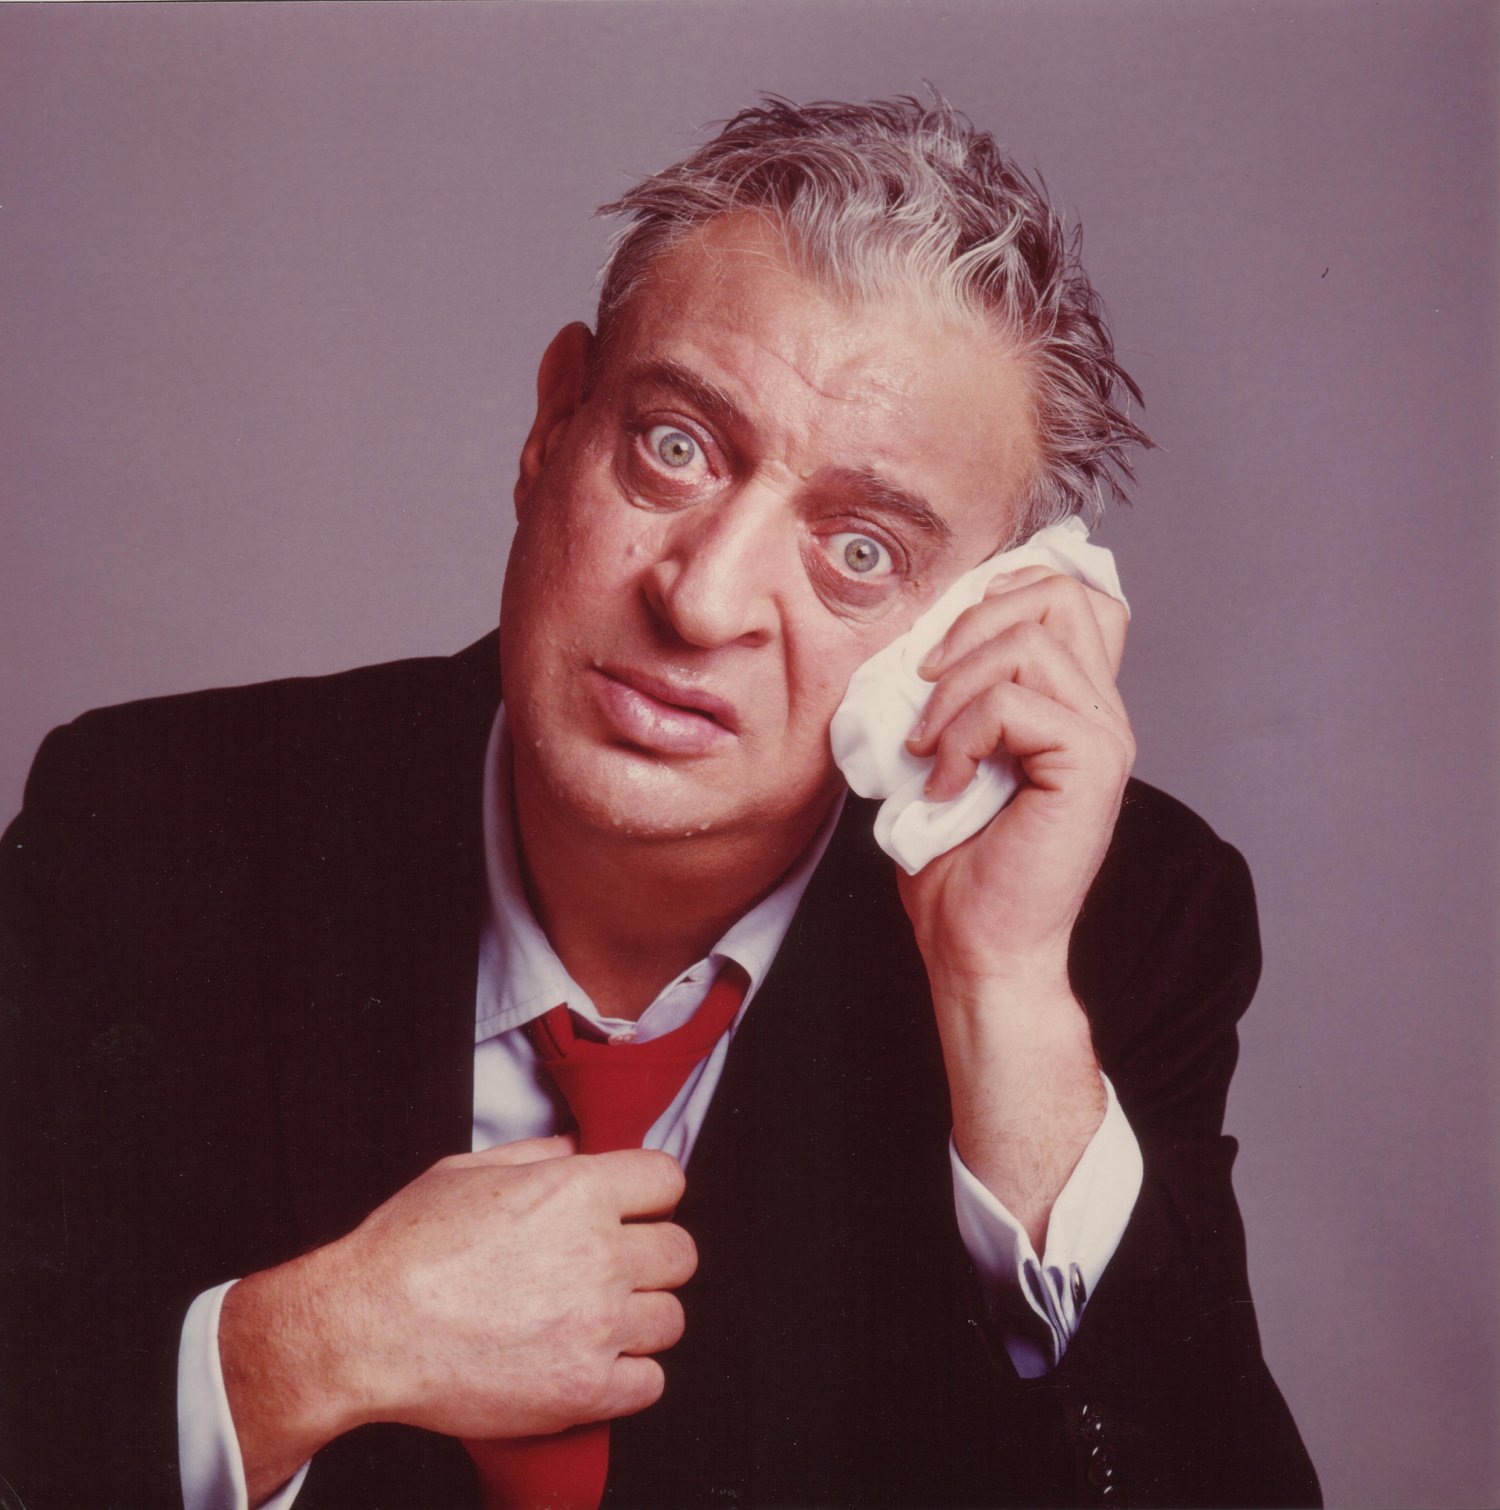 The late Rodney Dangerfield with confused look on face